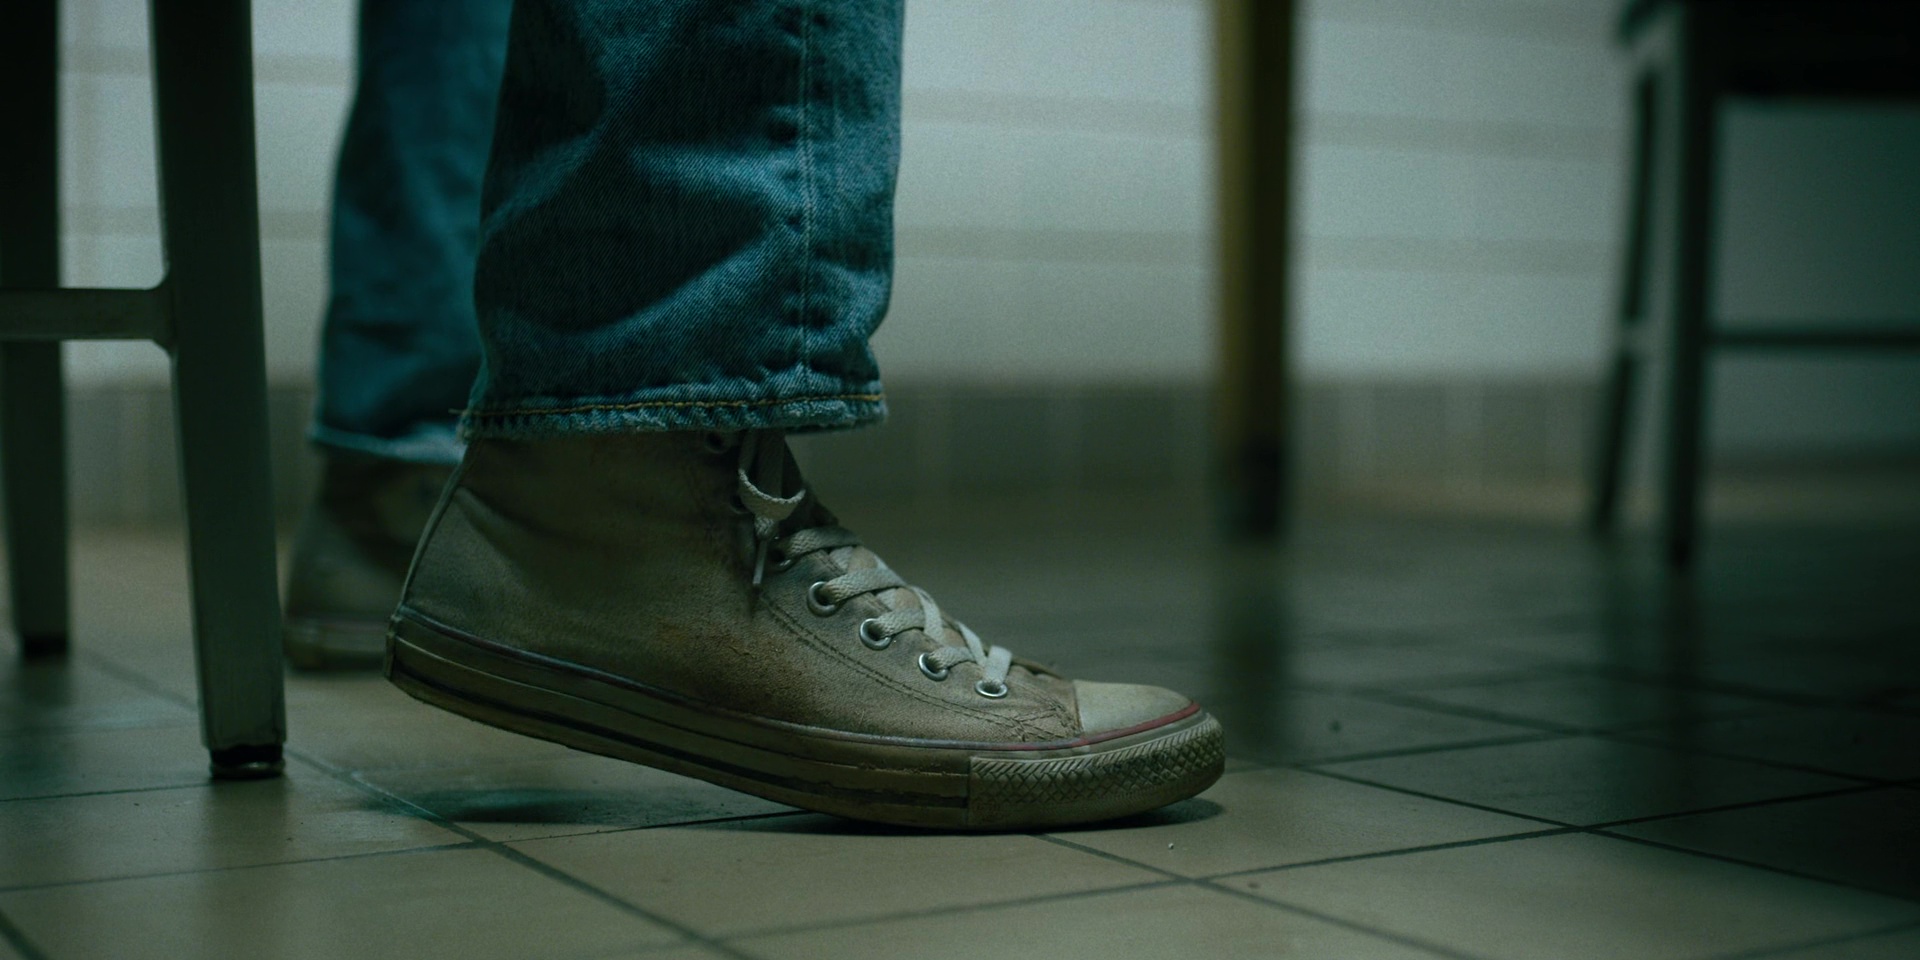 Converse High Top Sneakers Worn By Millie Bobby Brown In Stranger ...